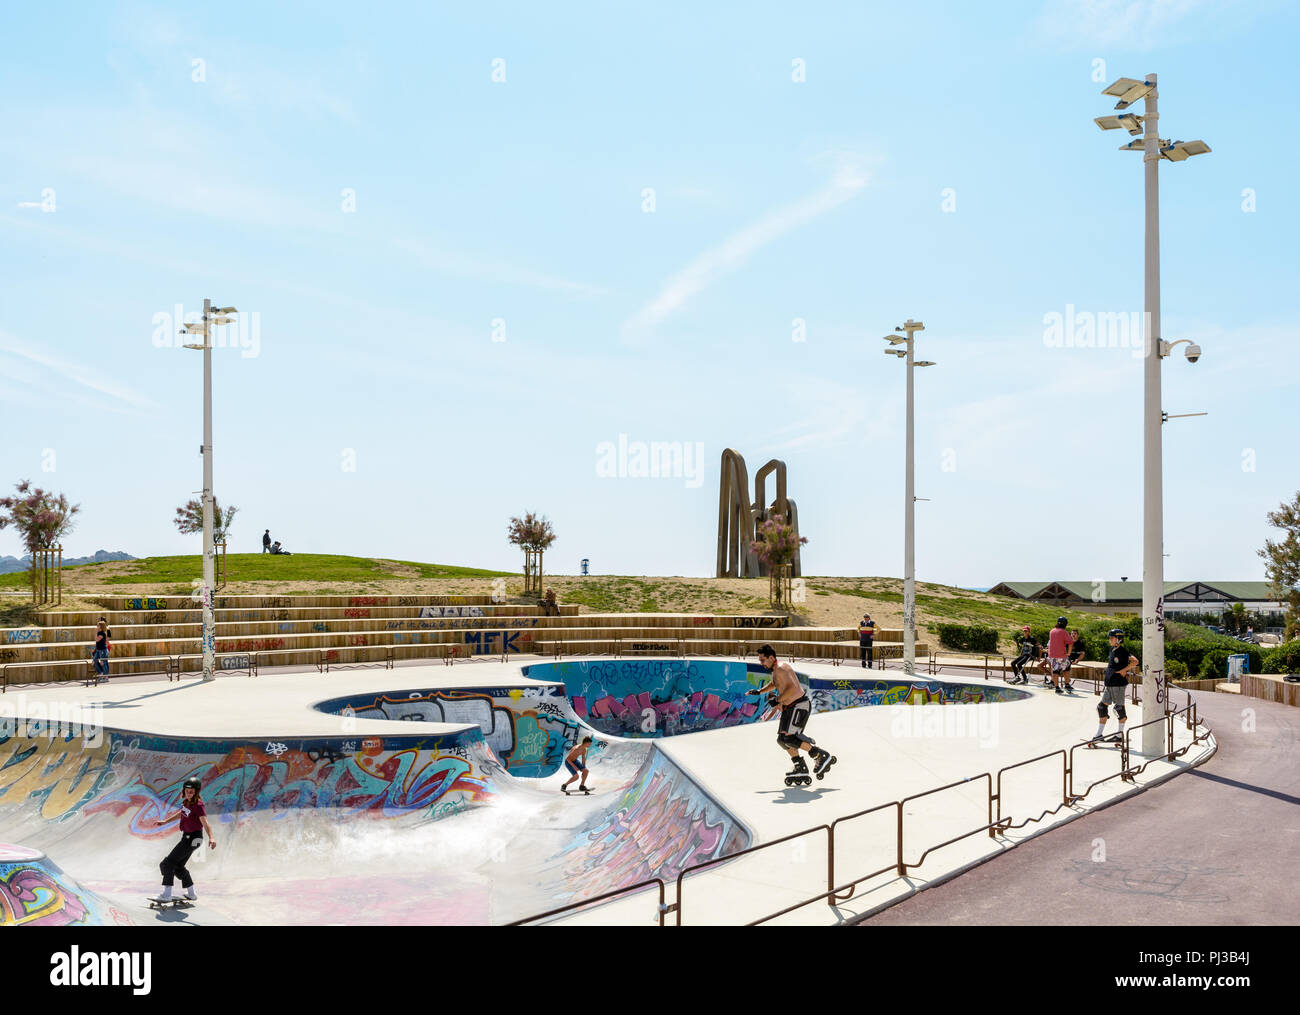 View of the skate bowl of Marseille, France, known as the skatepark of  Prado, with young people skating, rollerskating or scootering Stock Photo -  Alamy